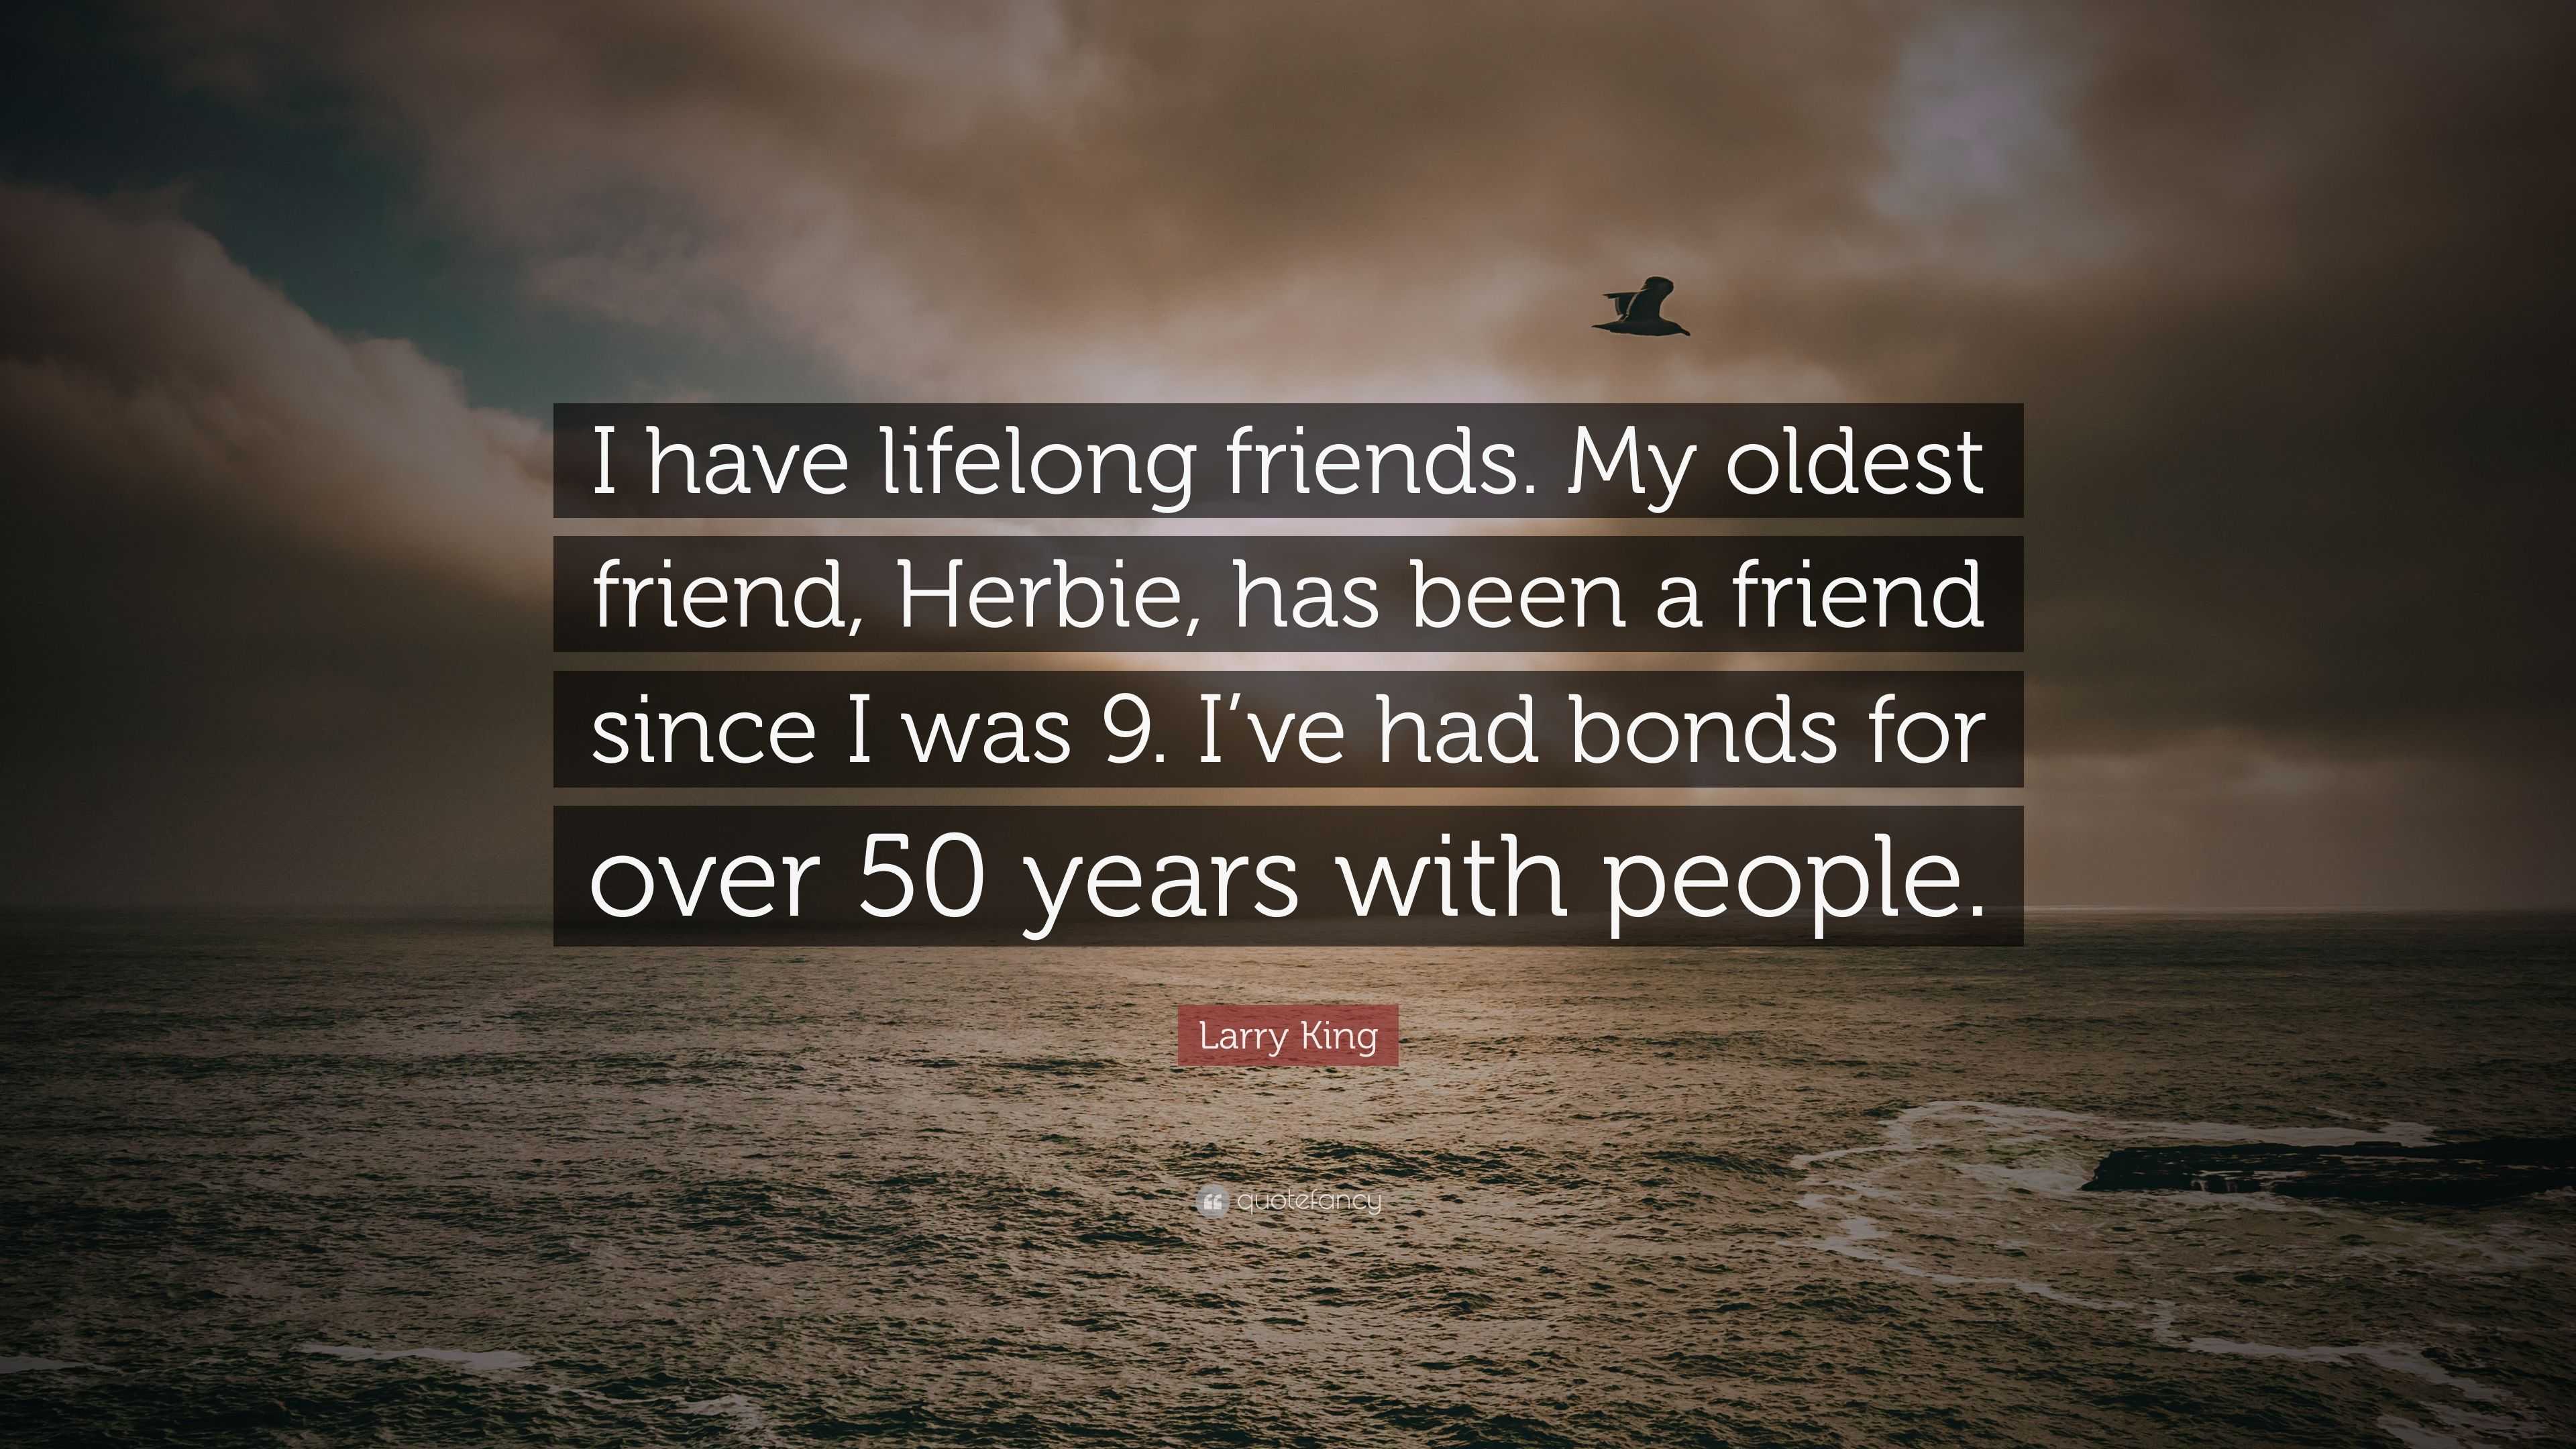 Quotes friends friend friendship lifetime lifelong life types true inspirational seasonal chat sayings word forever friendships words stampinbythesea quote title